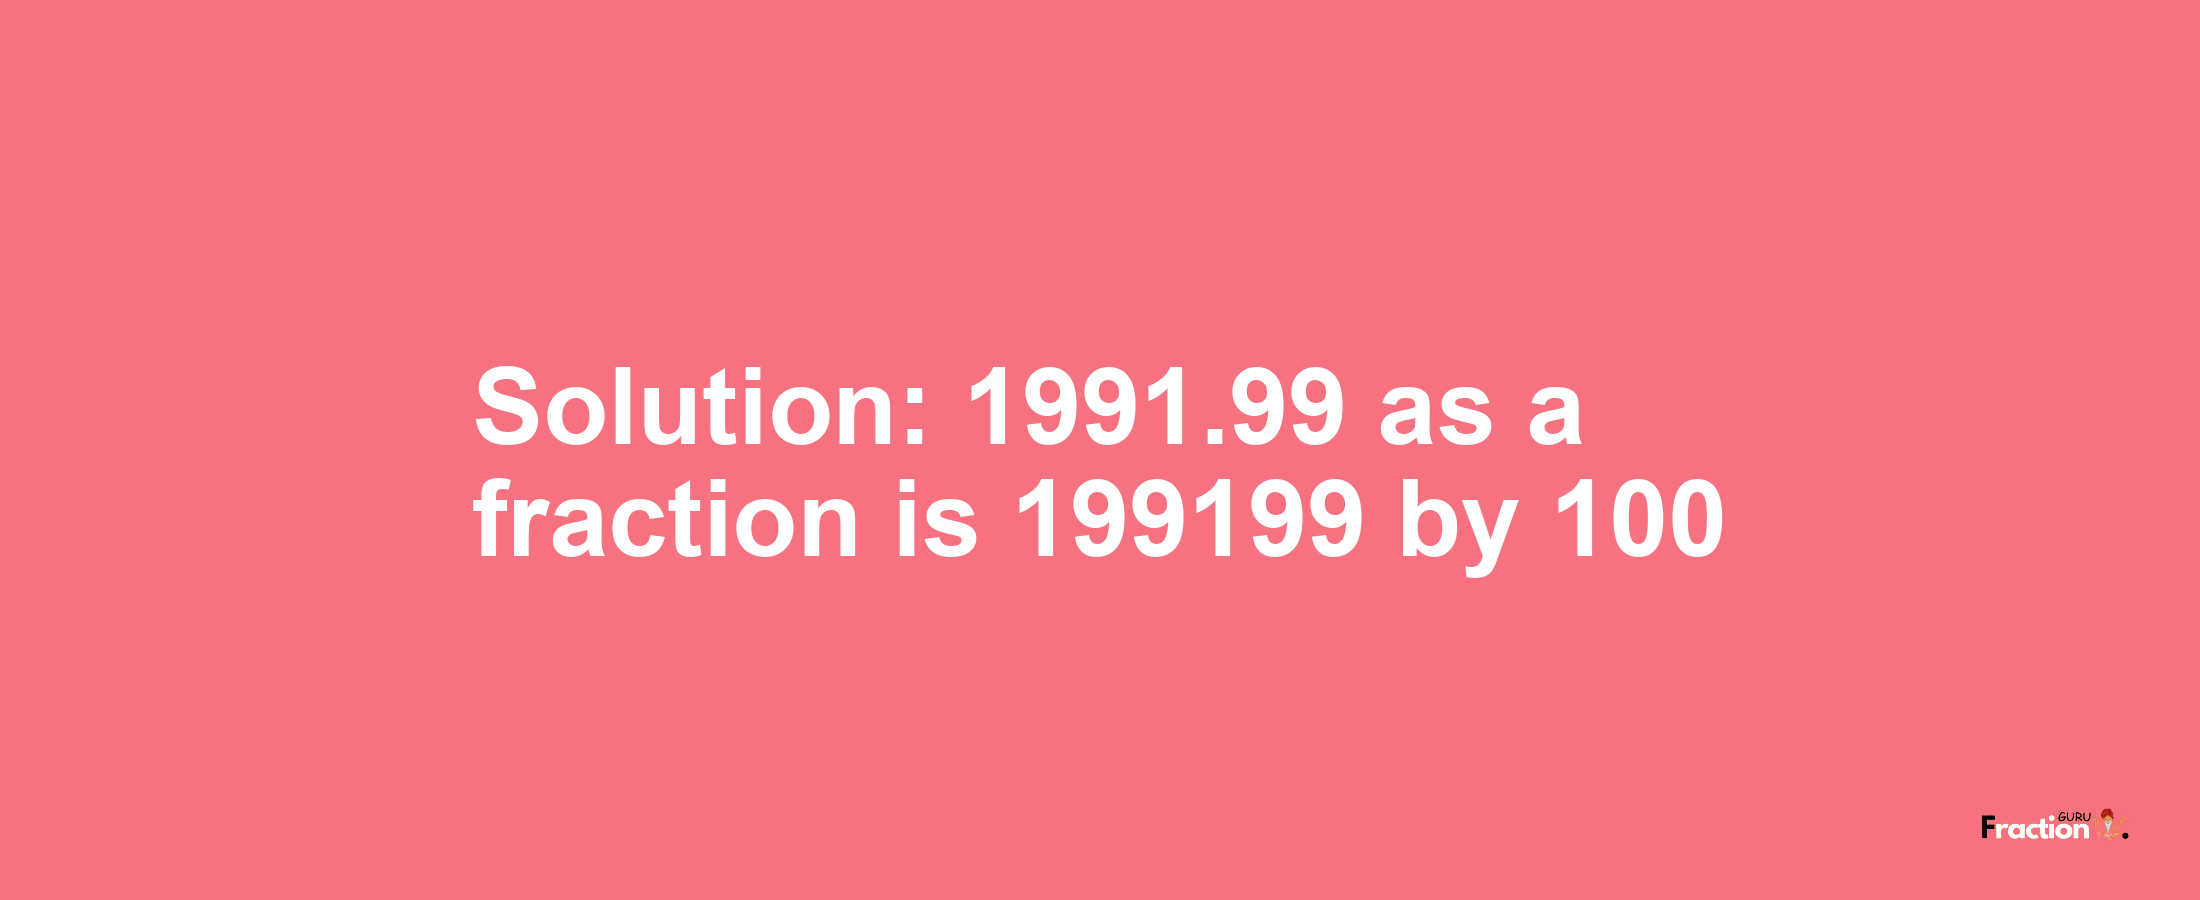 Solution:1991.99 as a fraction is 199199/100